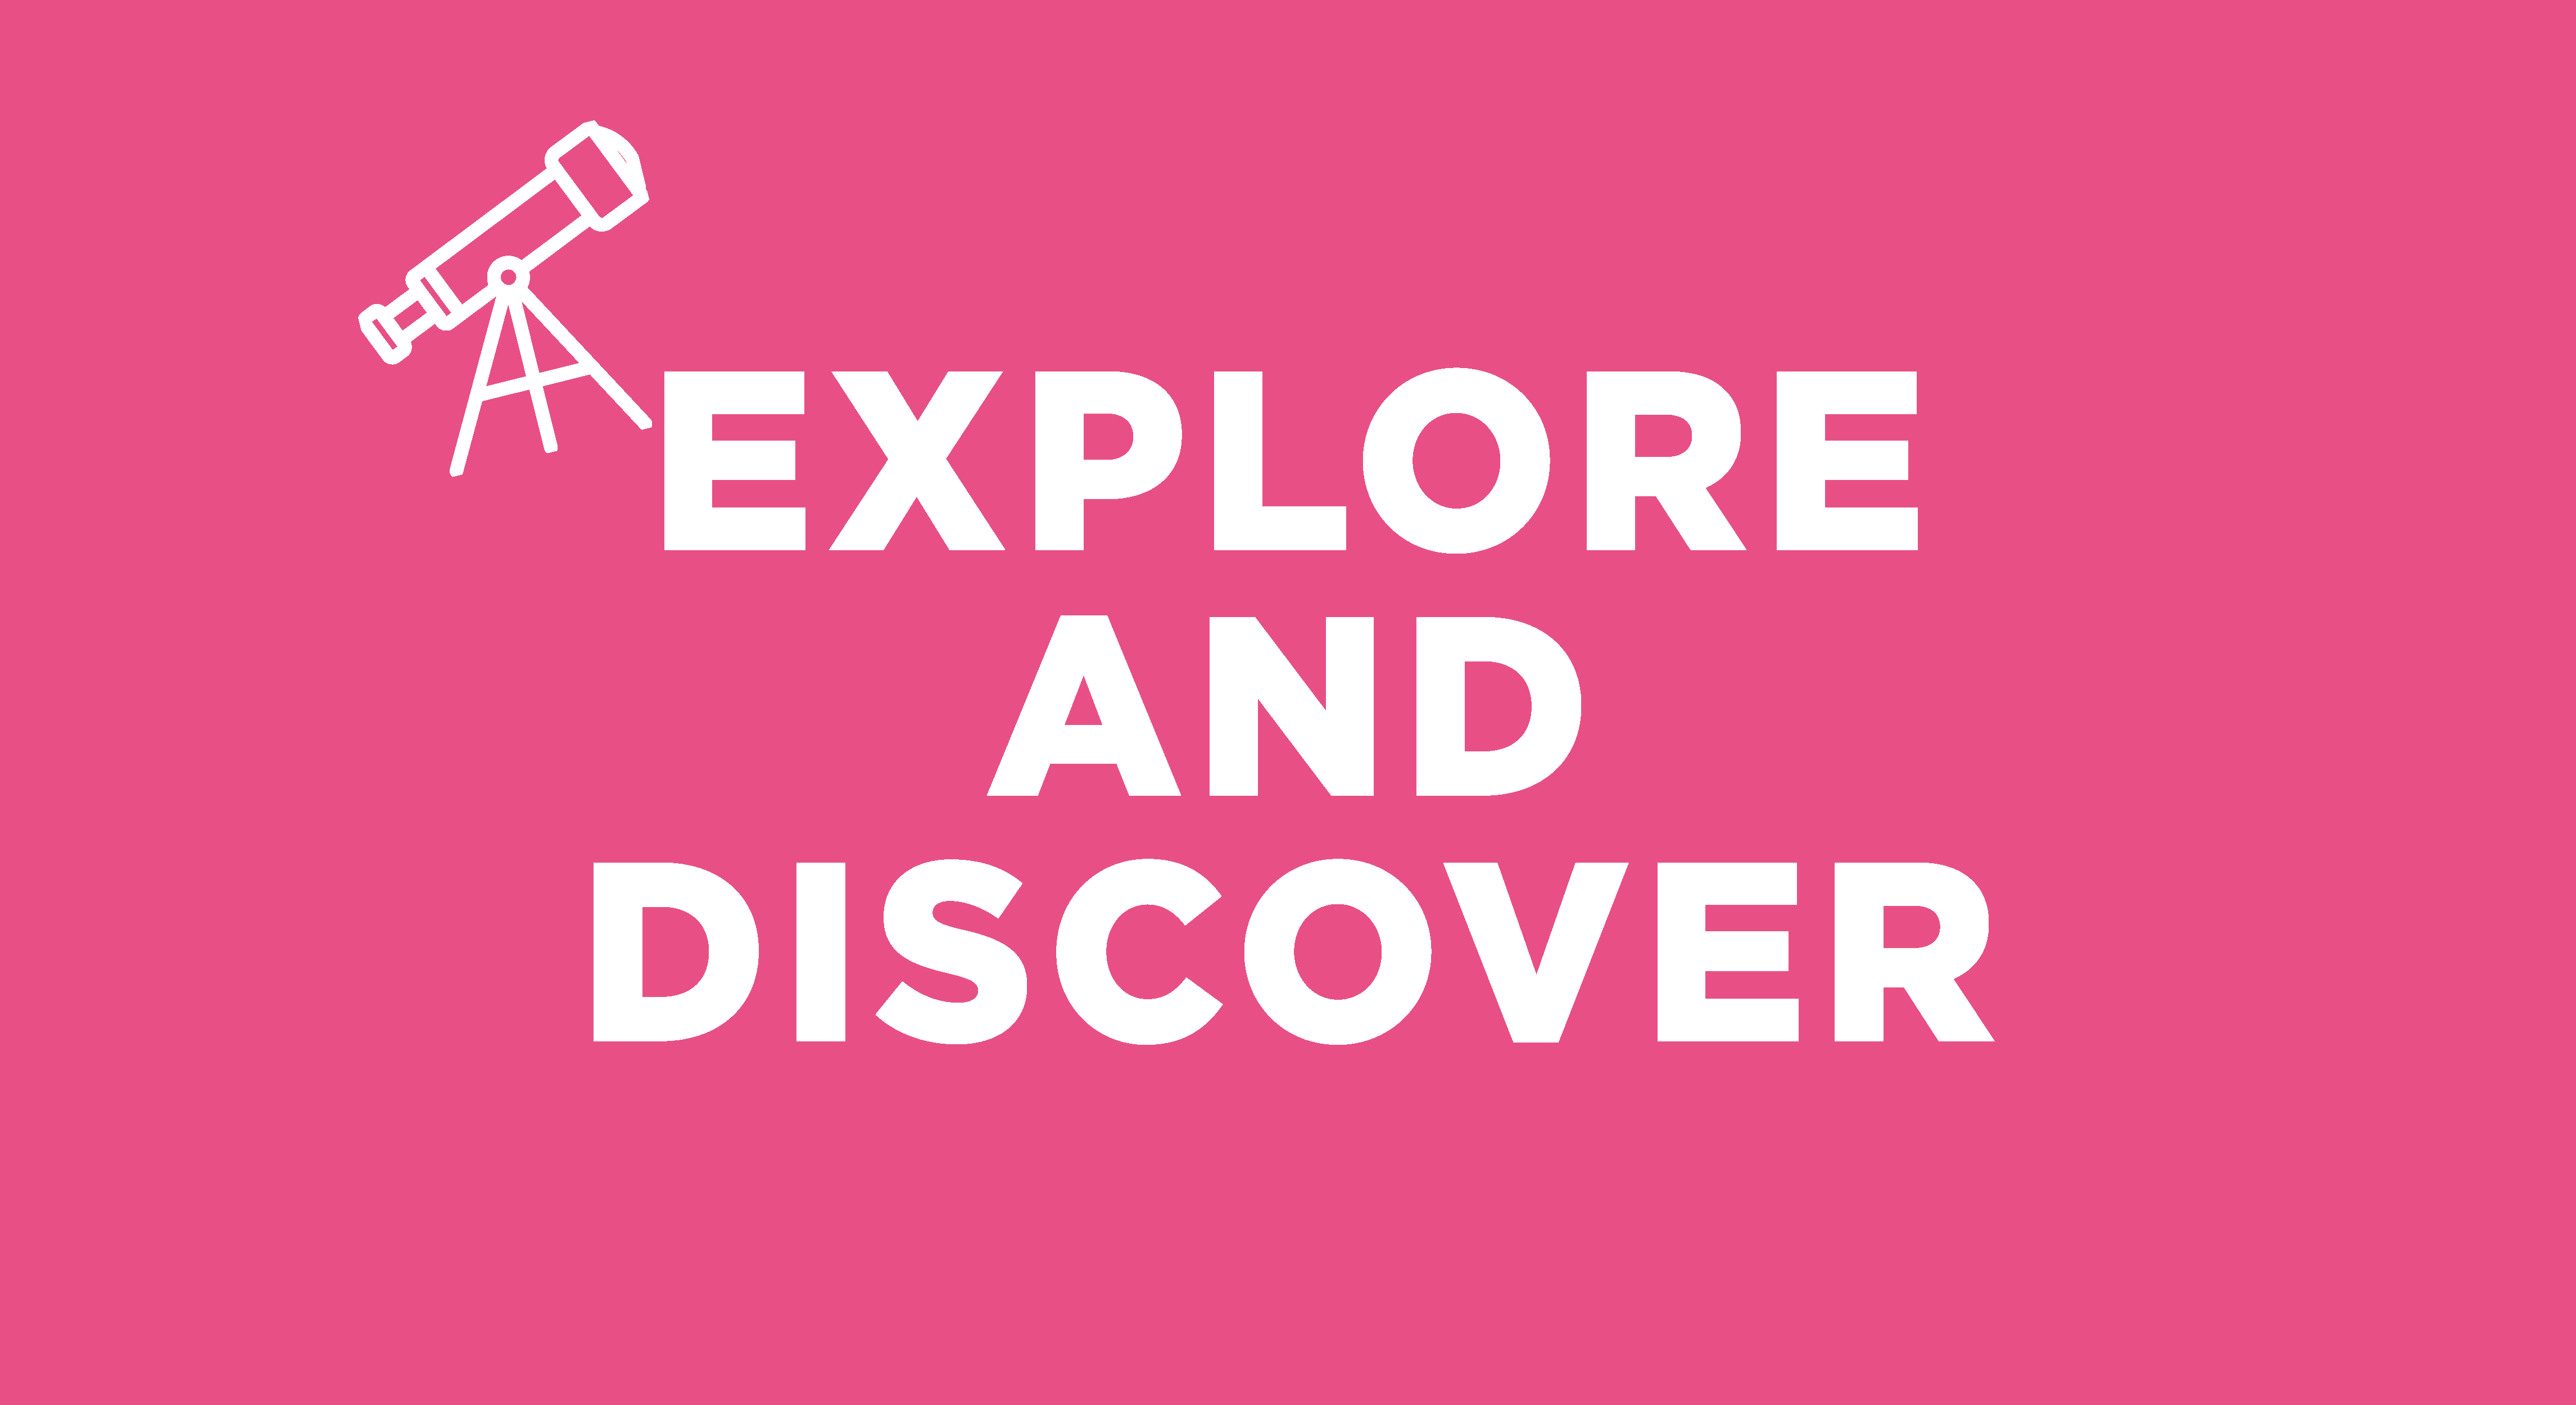 Explore and discover